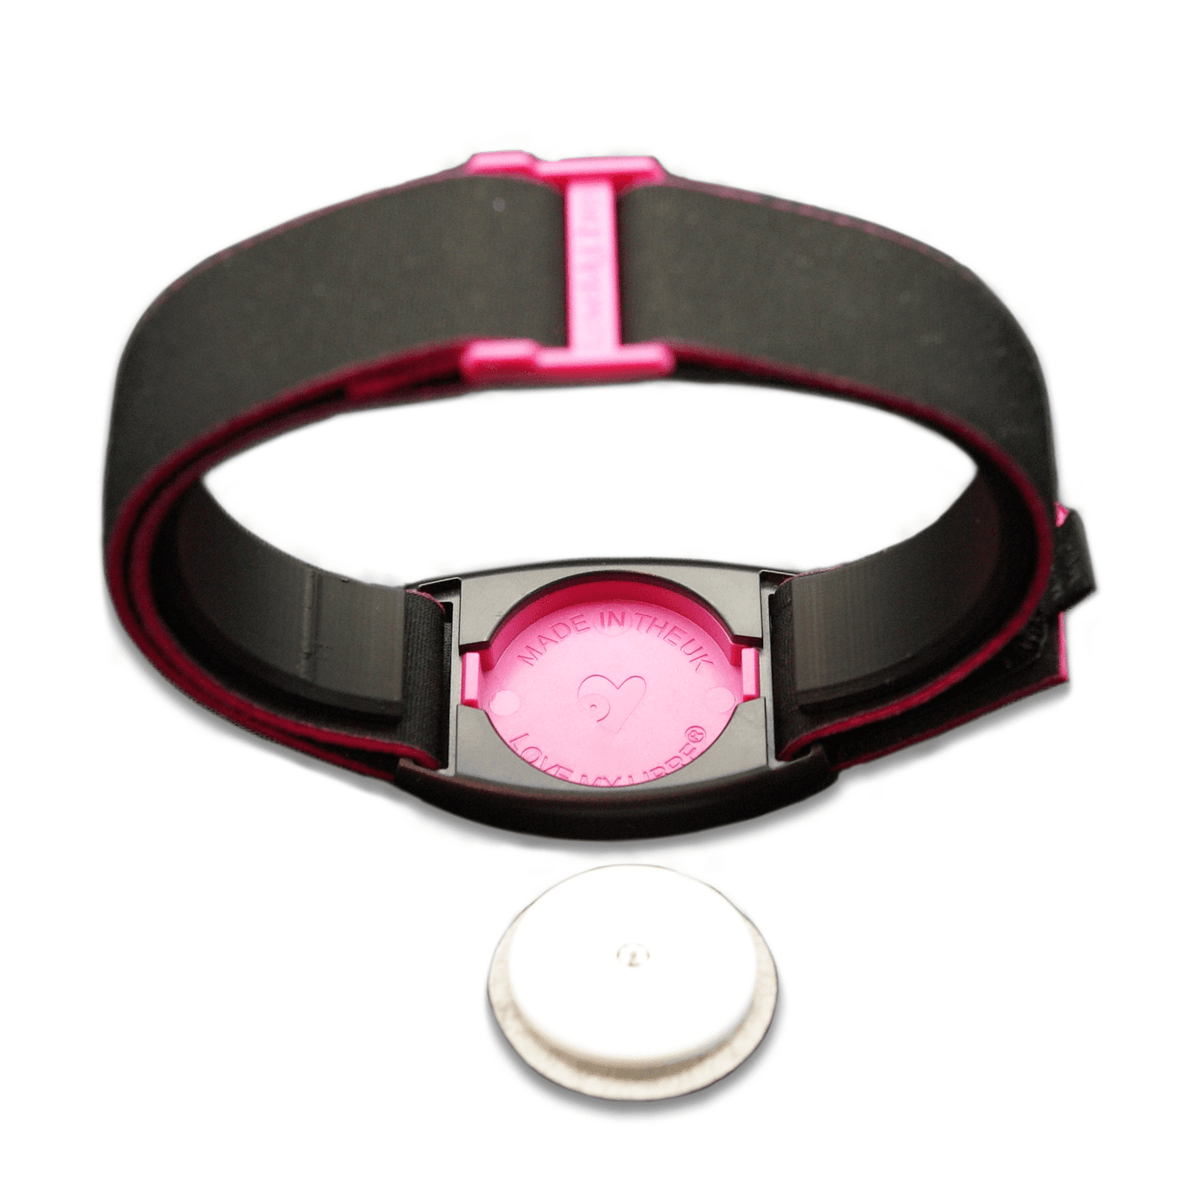 Libreband Armband in reverse with magenta cover. Shown with Freestyle Libre 2 sensor.